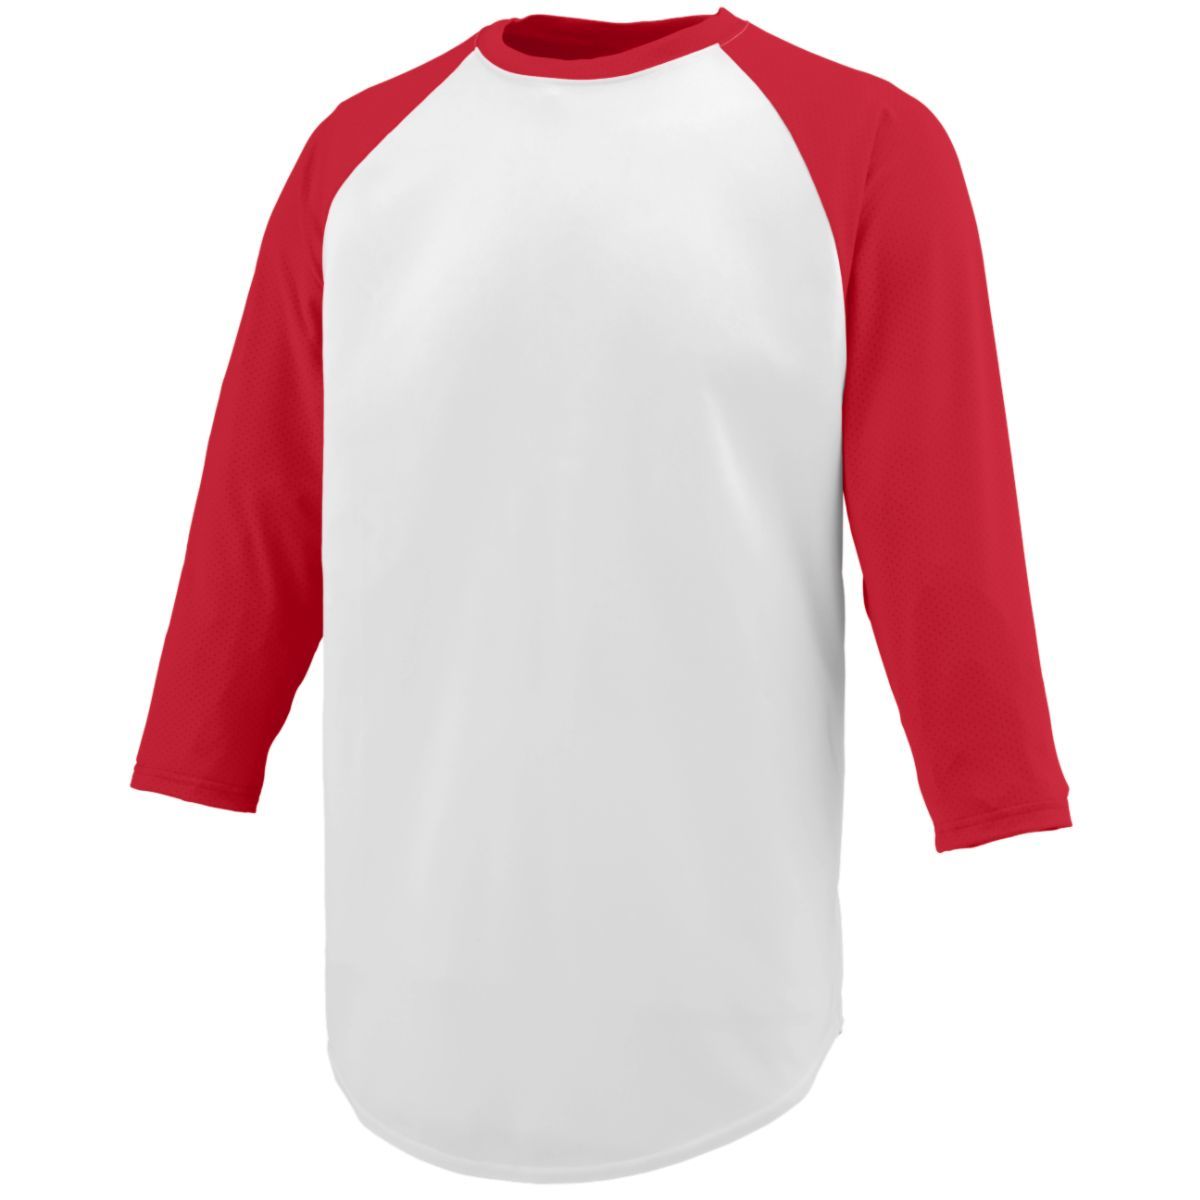 Augusta Sportswear Youth Nova Jersey in White/Red  -Part of the Youth, Youth-Jersey, Augusta-Products, Baseball, Shirts, All-Sports, All-Sports-1 product lines at KanaleyCreations.com